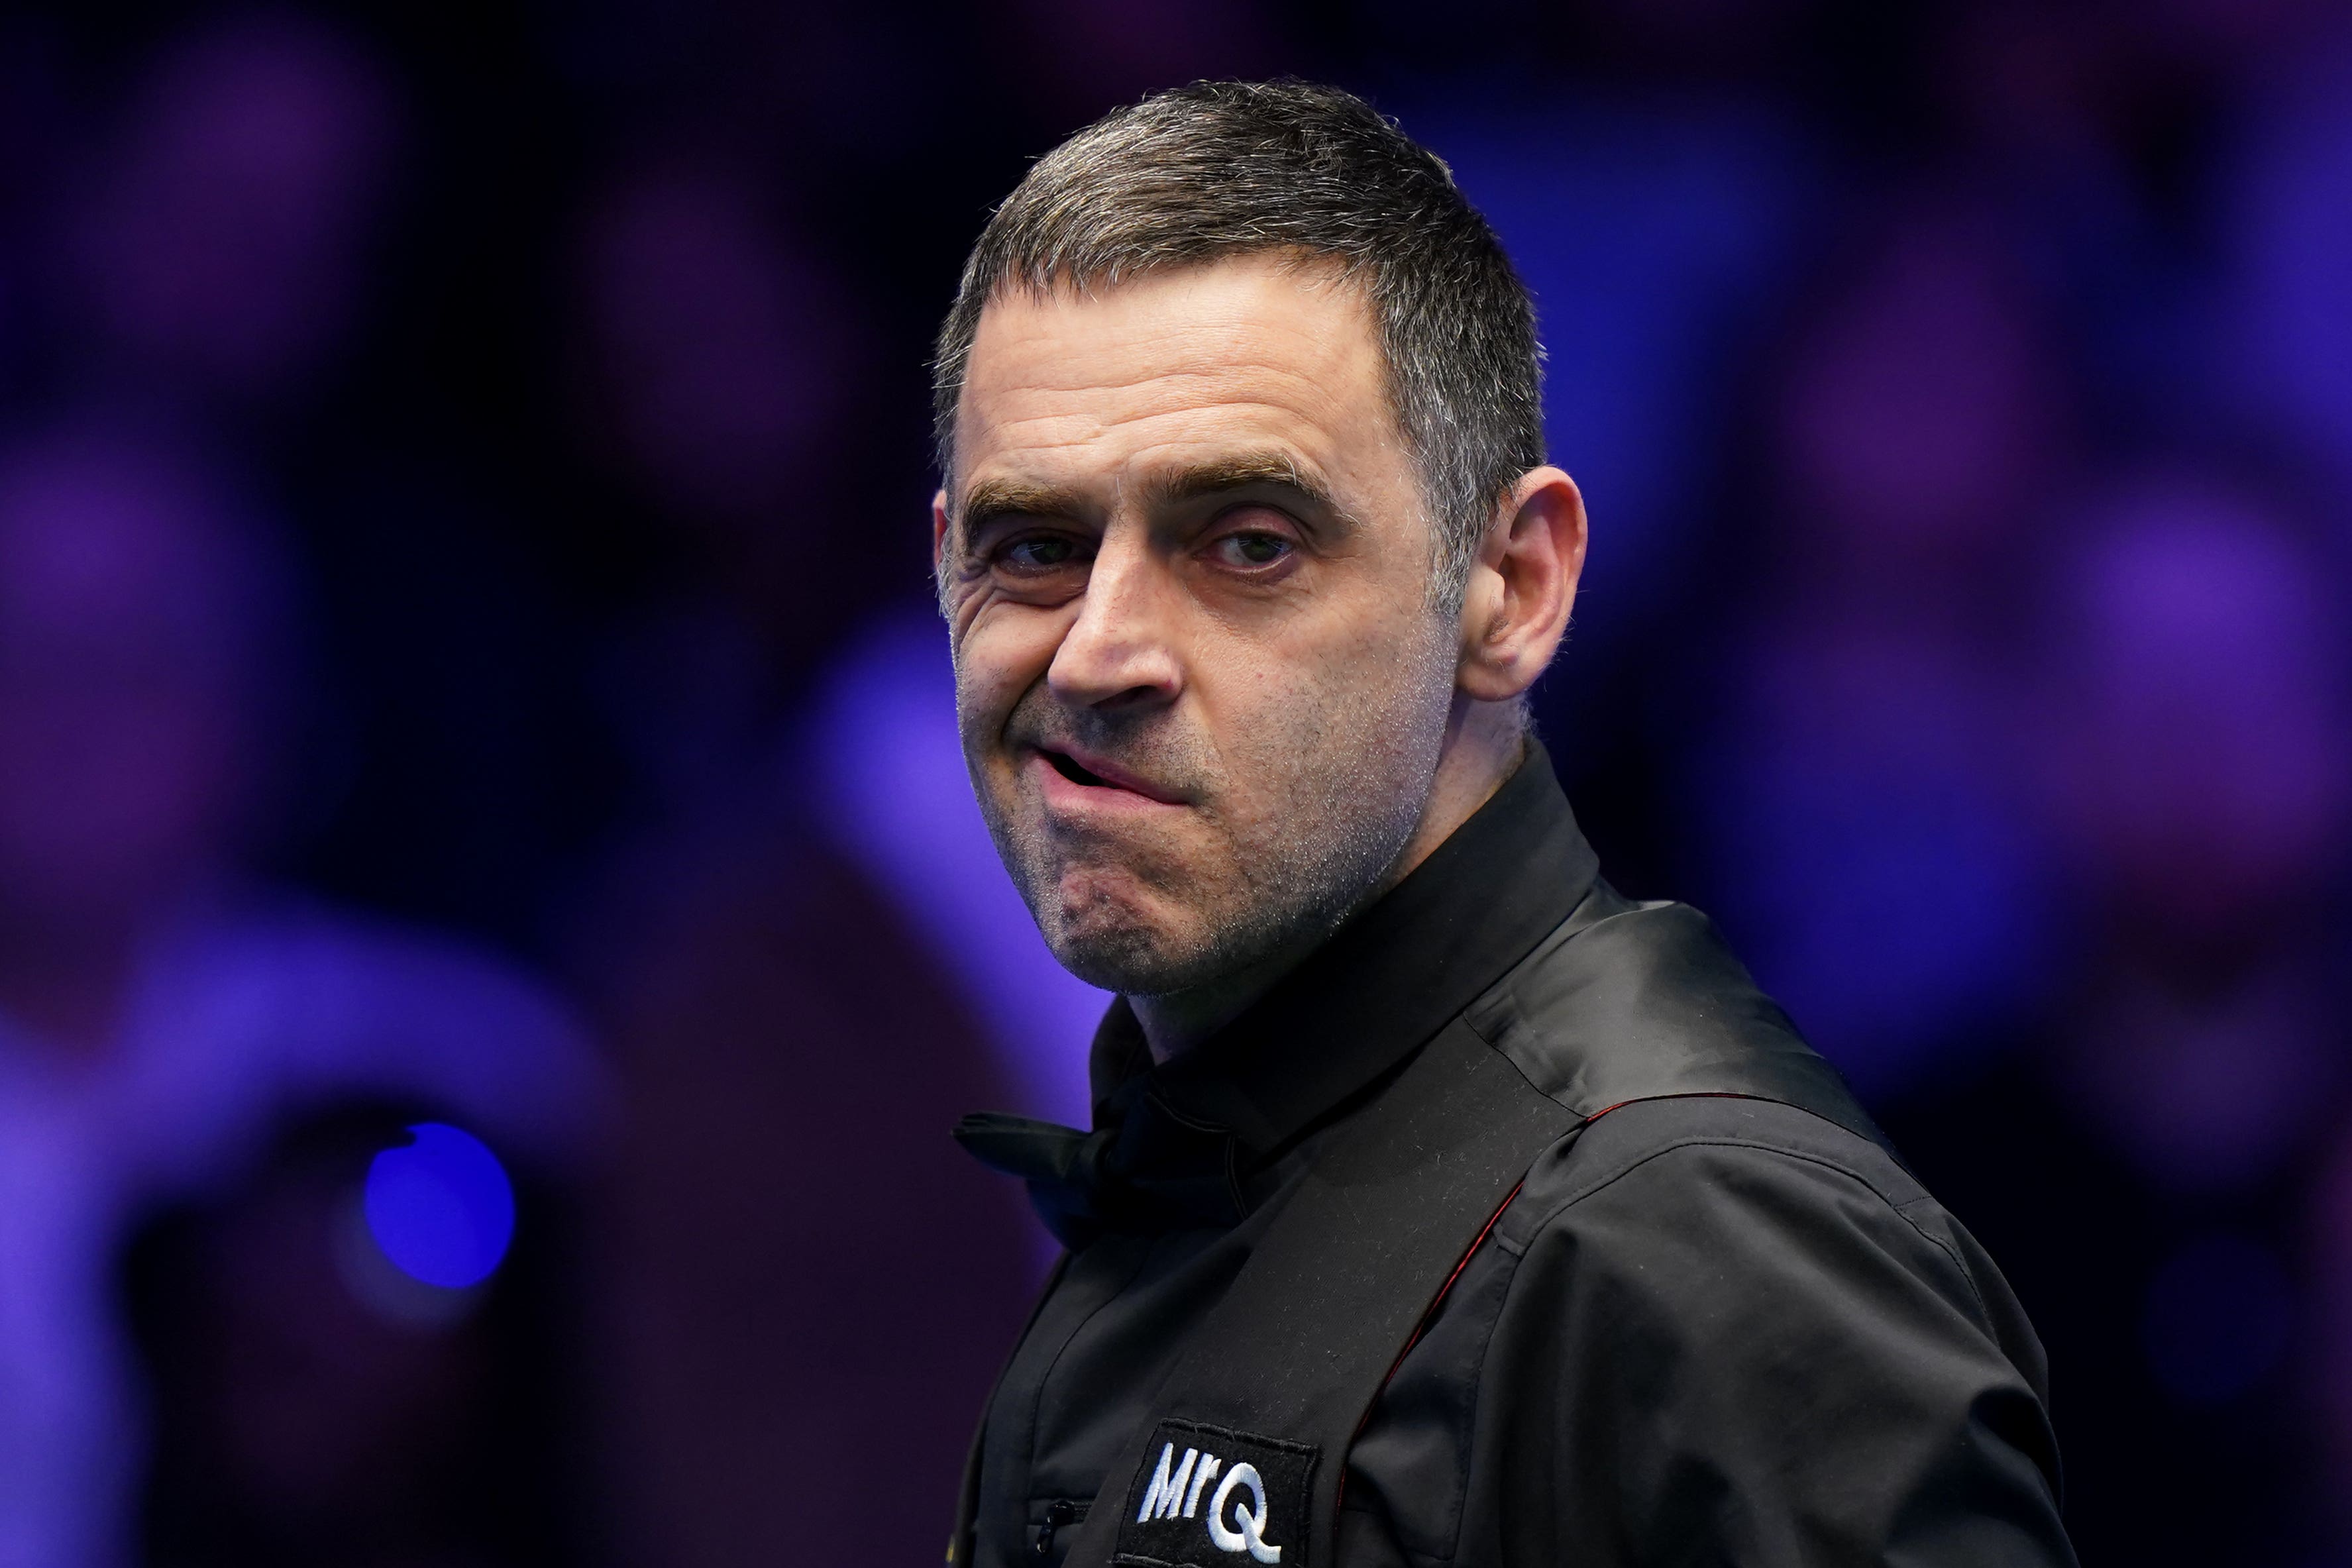 Ronnie O’Sullivan is trying to change his thinking